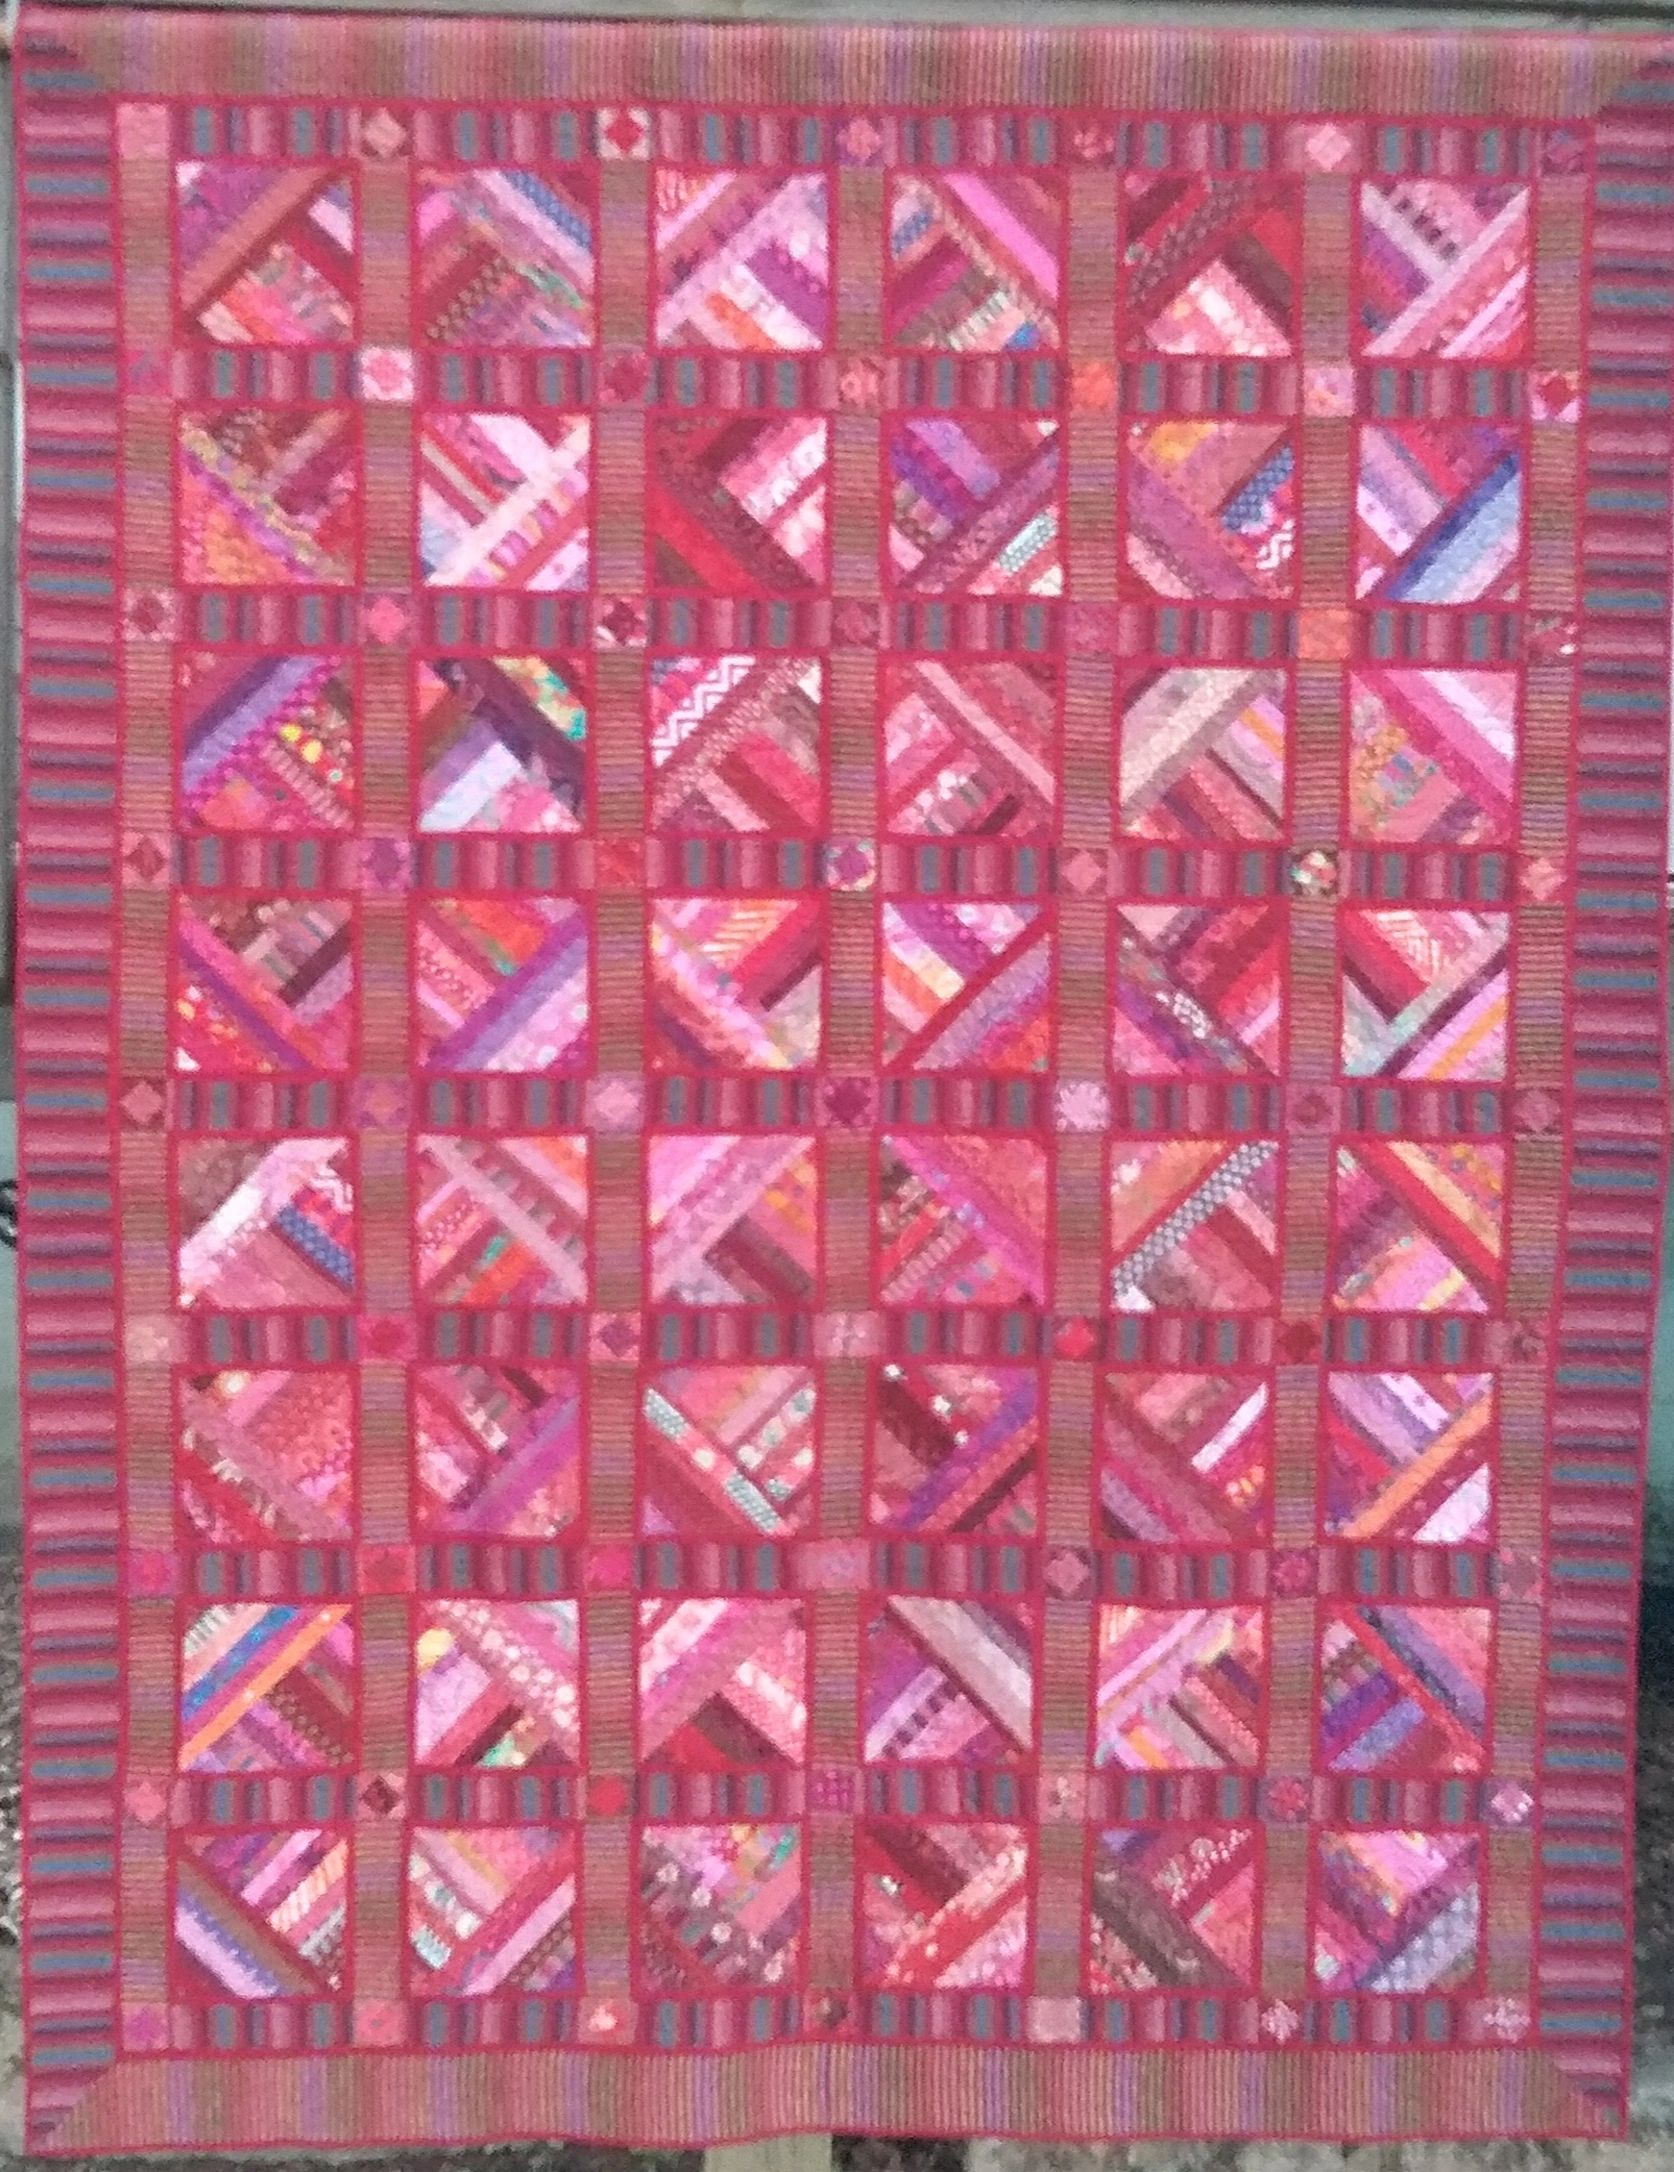 Full size scrappy quilt in pinks and reds, with striped sashing